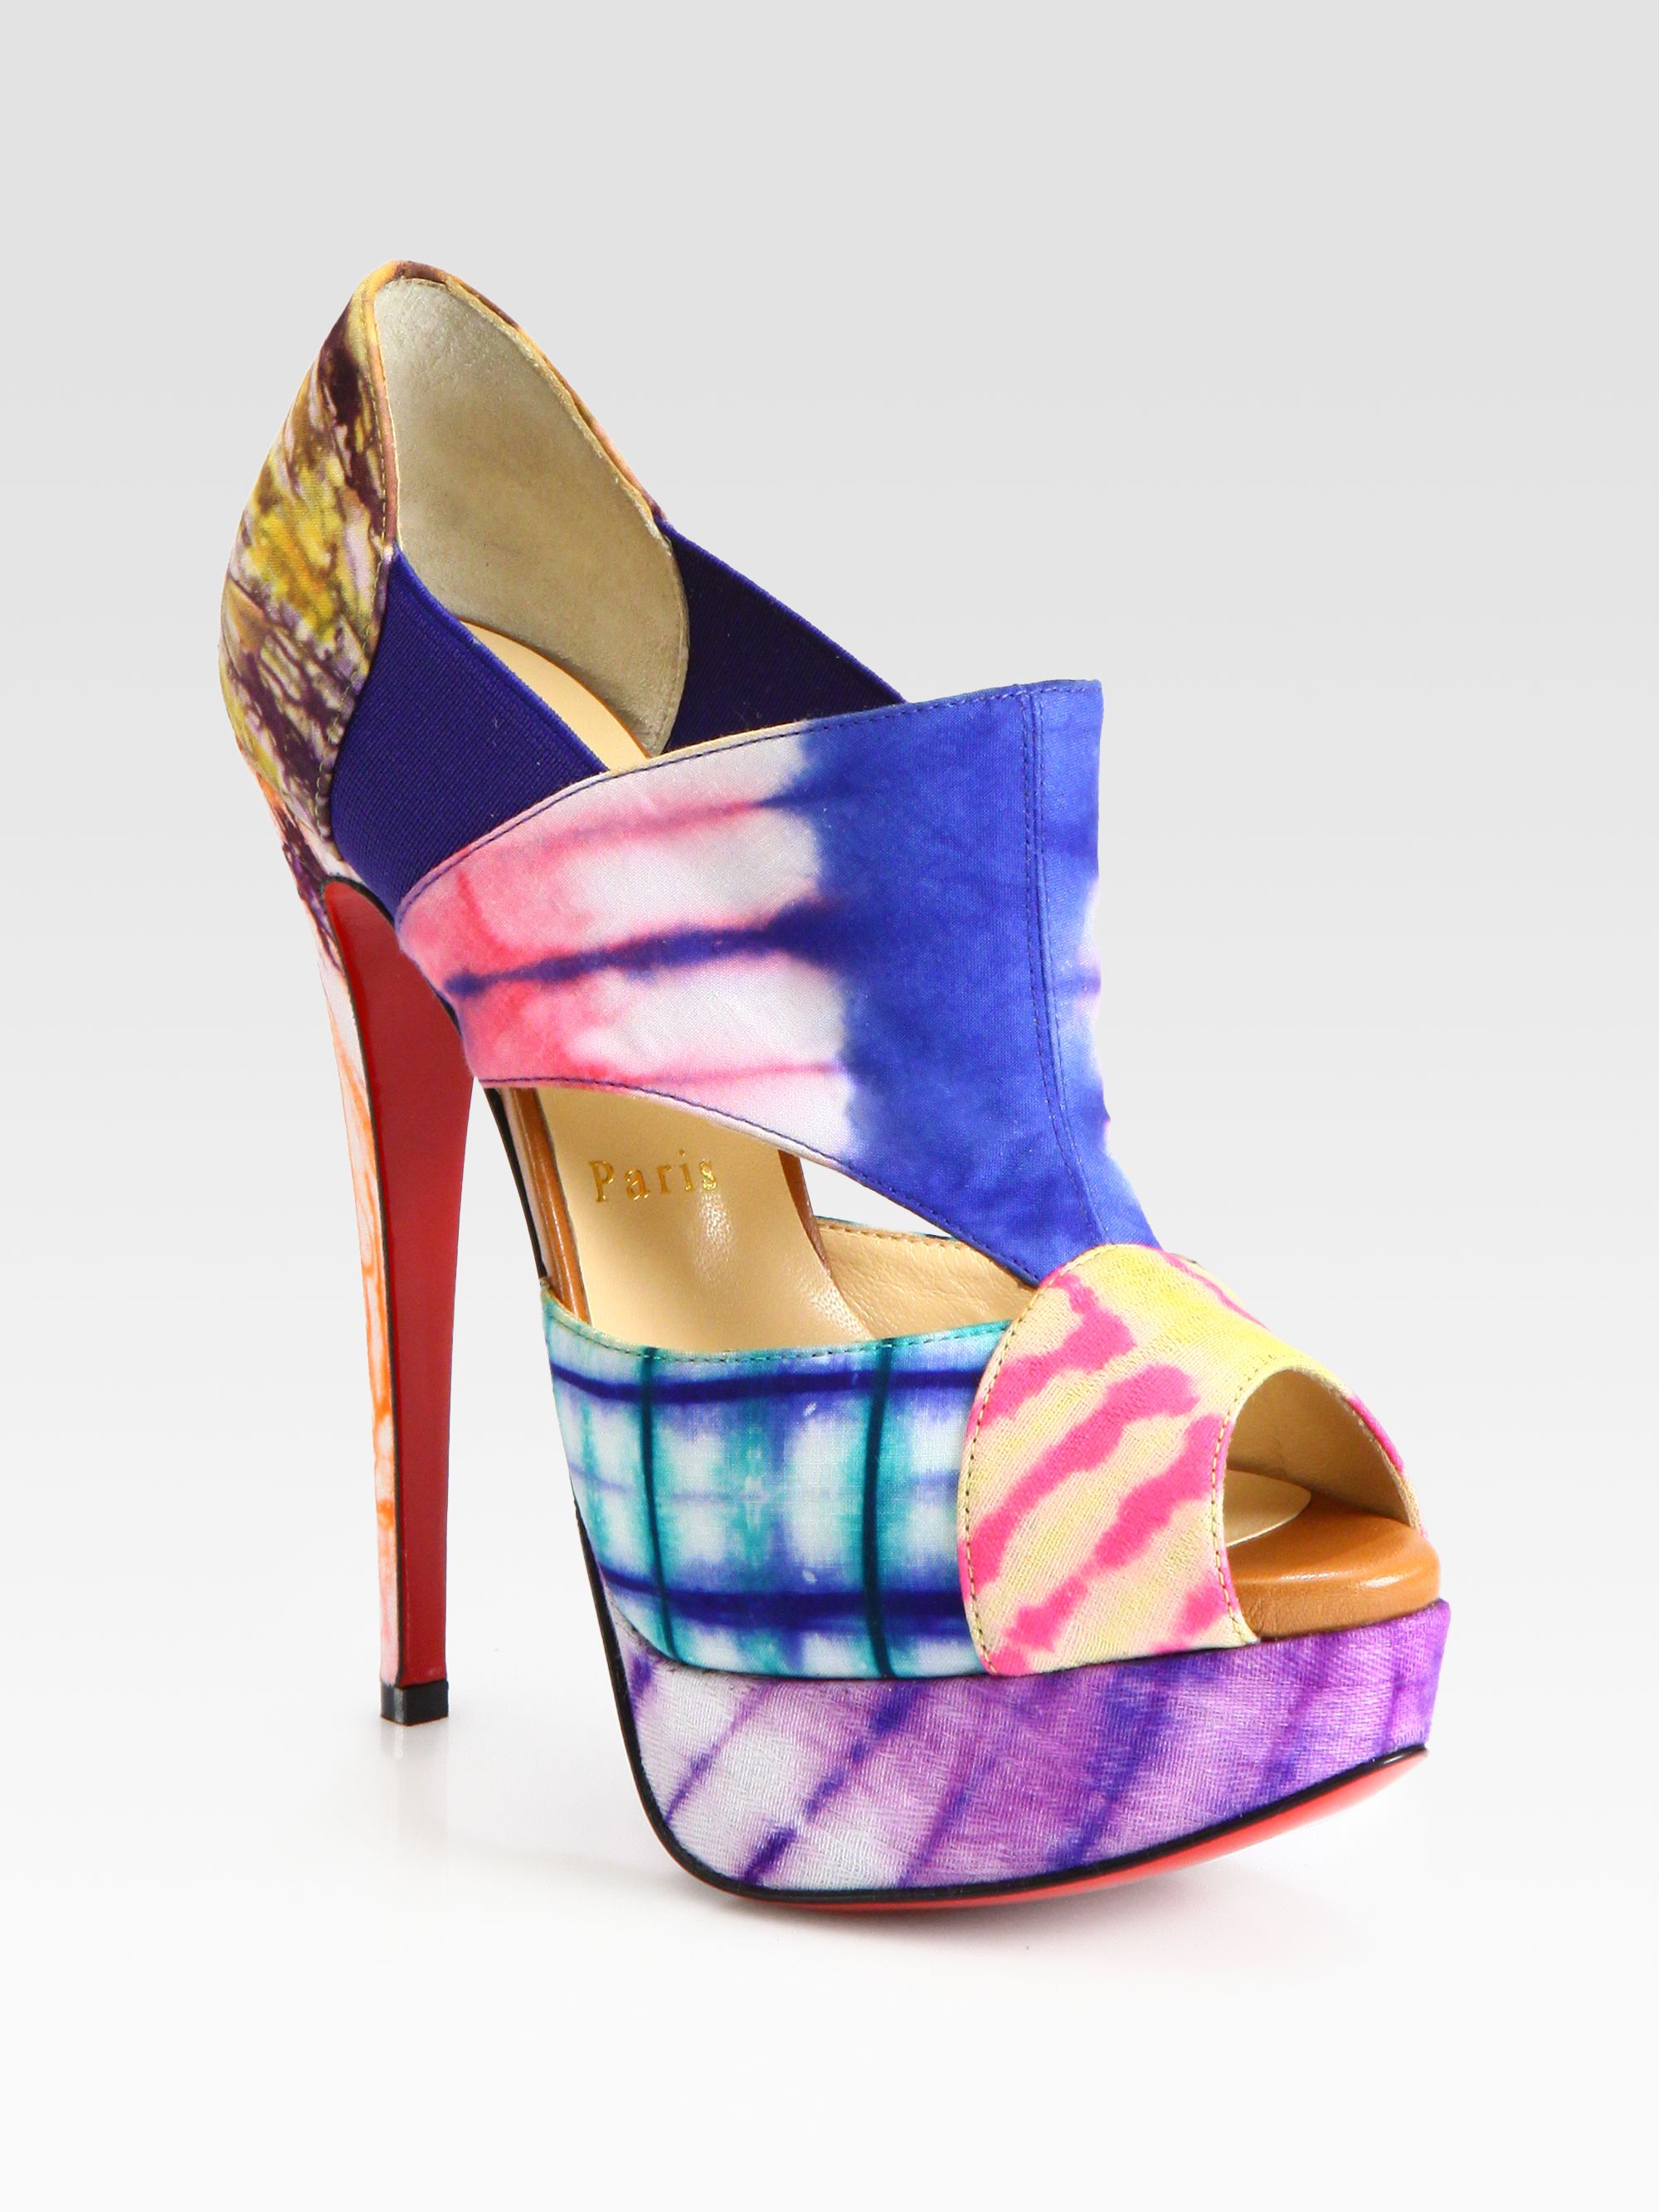 Christian louboutin Pitou Multicolored Tiedyed Platform Sandals in ...